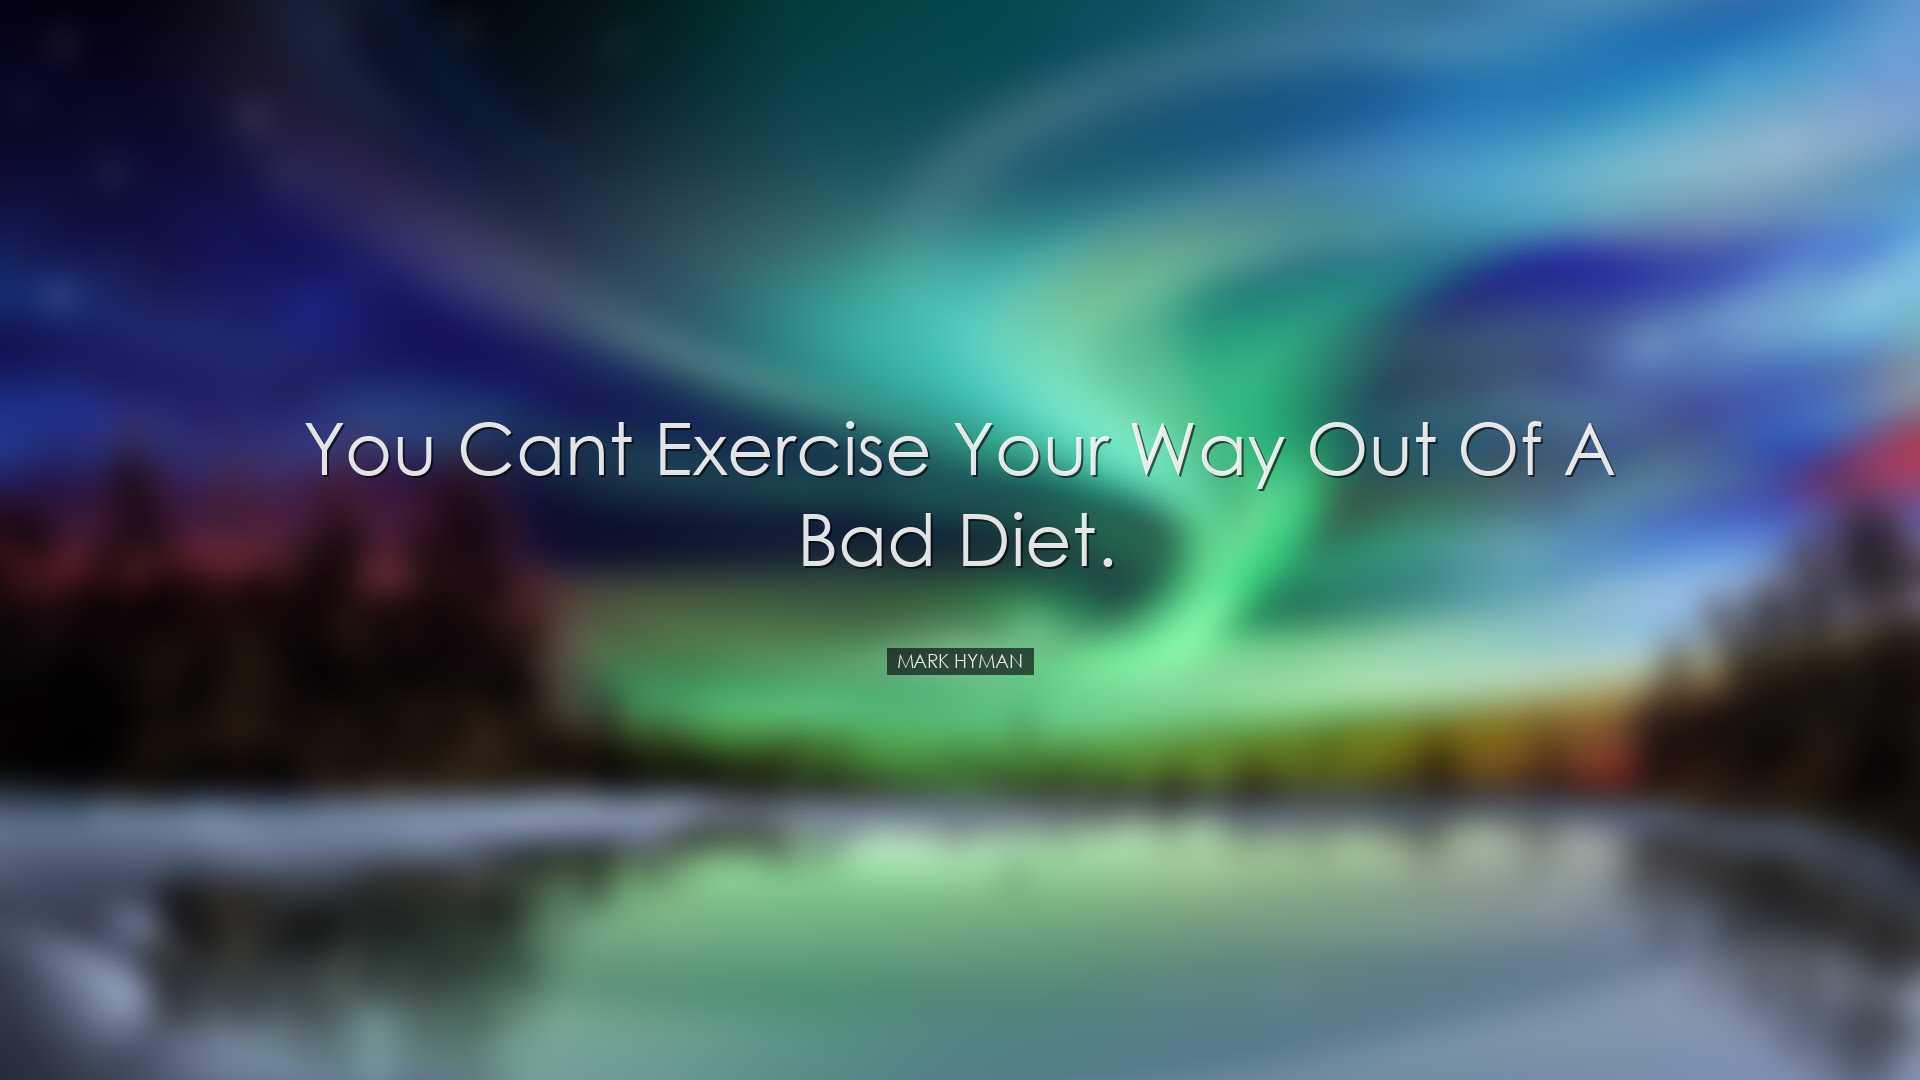 You cant exercise your way out of a bad diet. - Mark Hyman